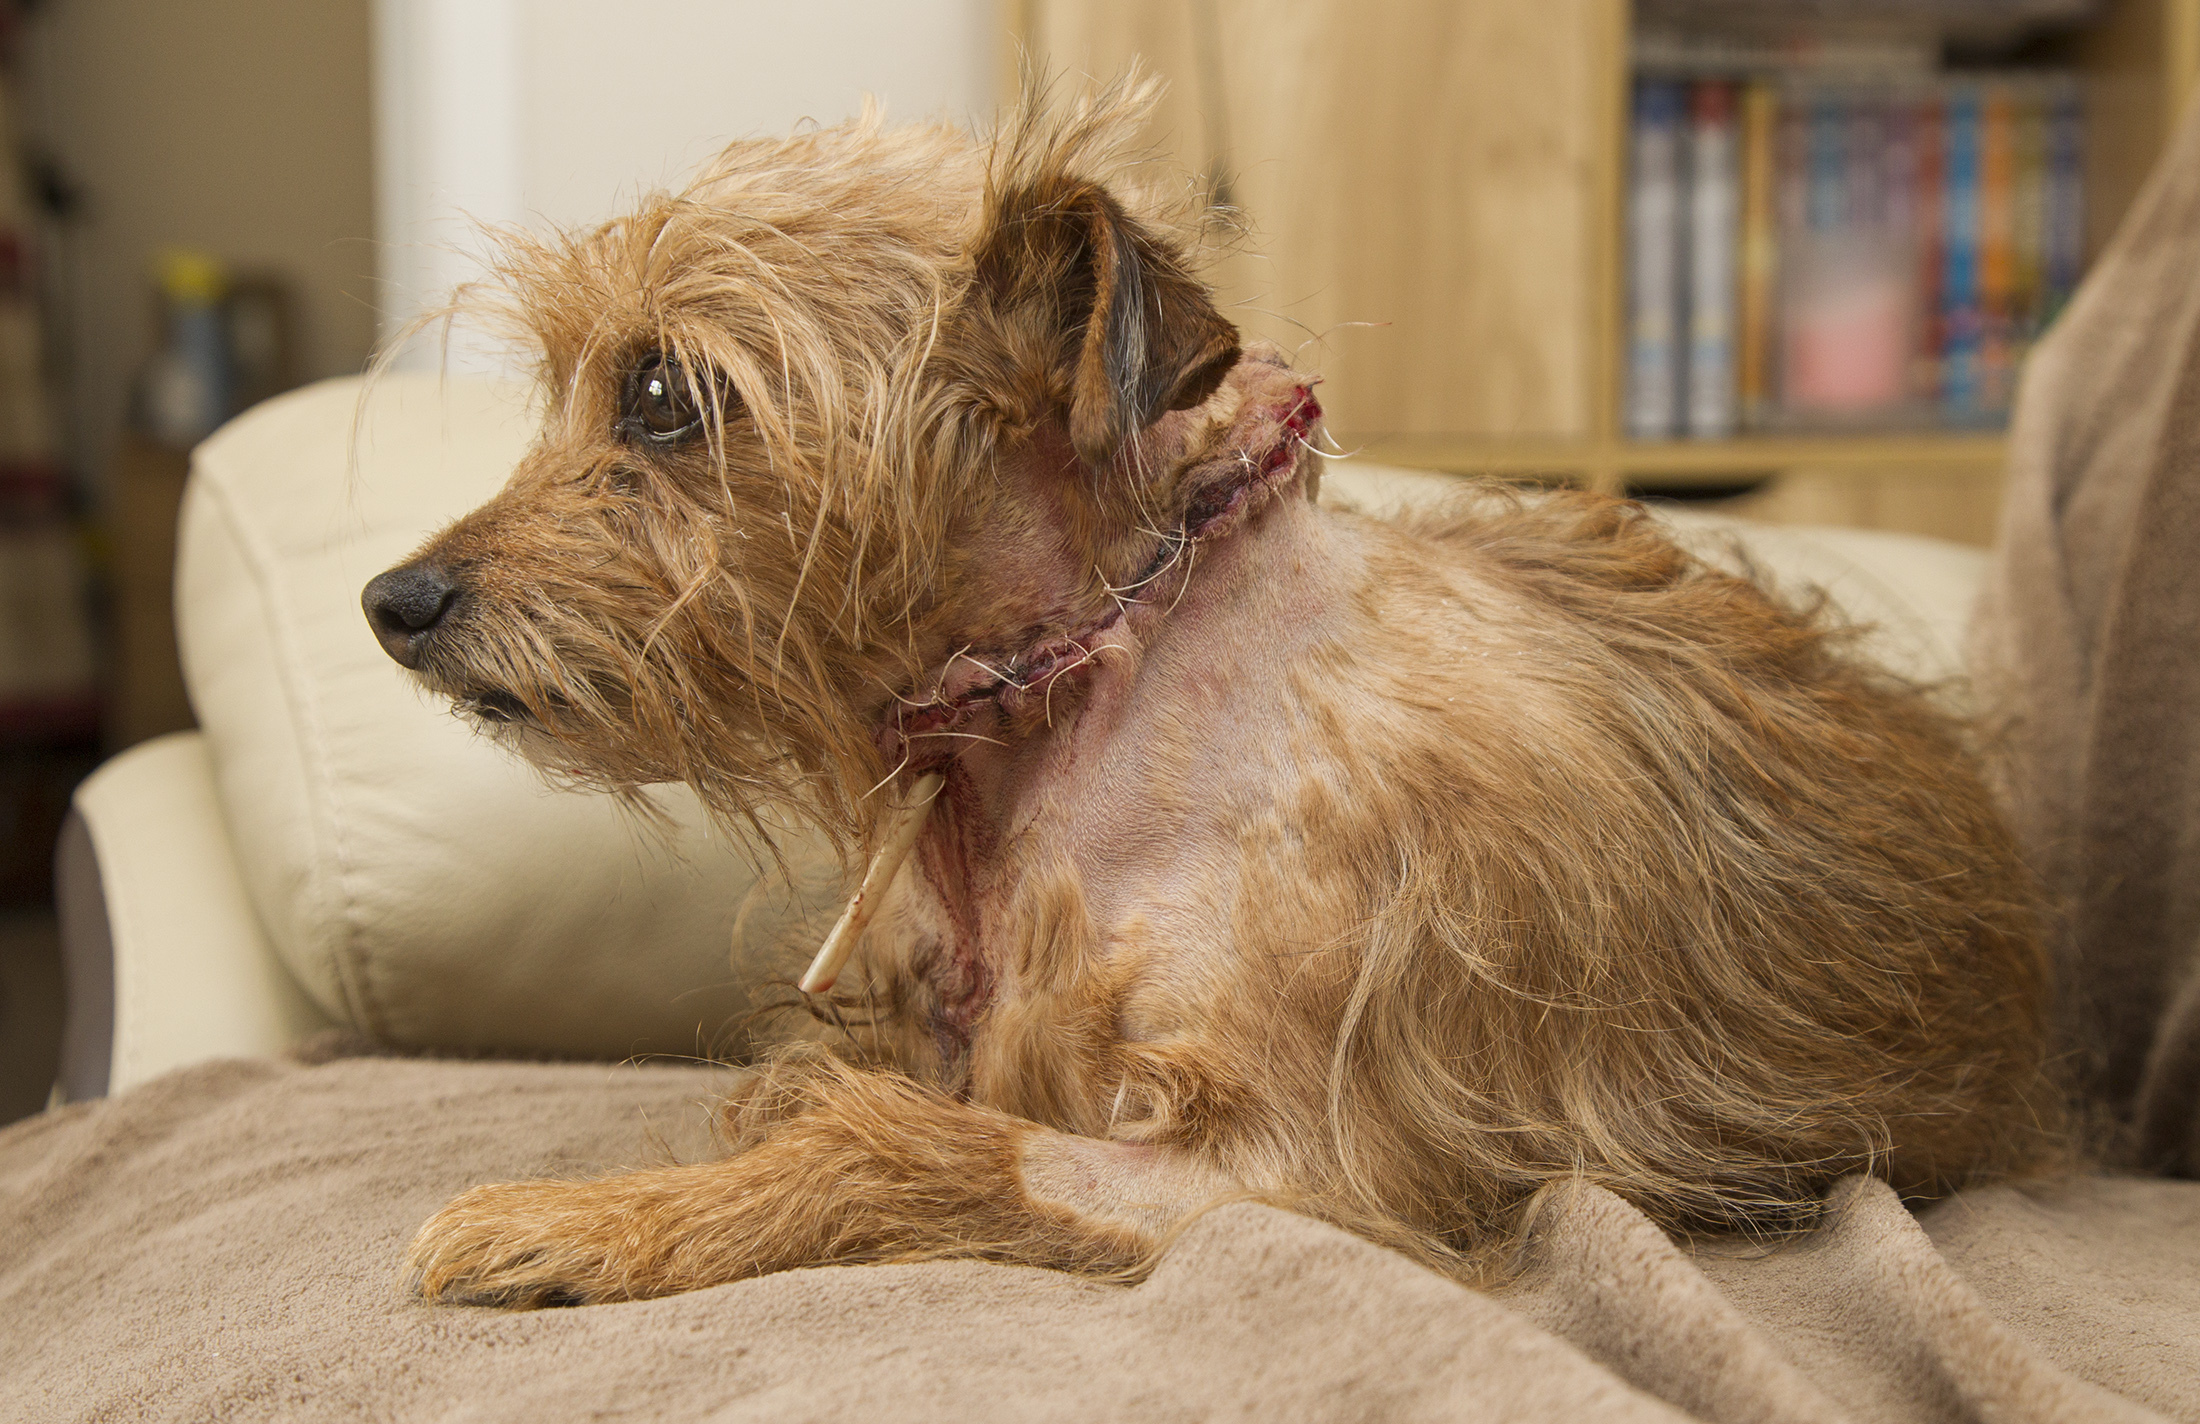 Dougal required stiches in his neck following an attack by another dog in Arbroath.